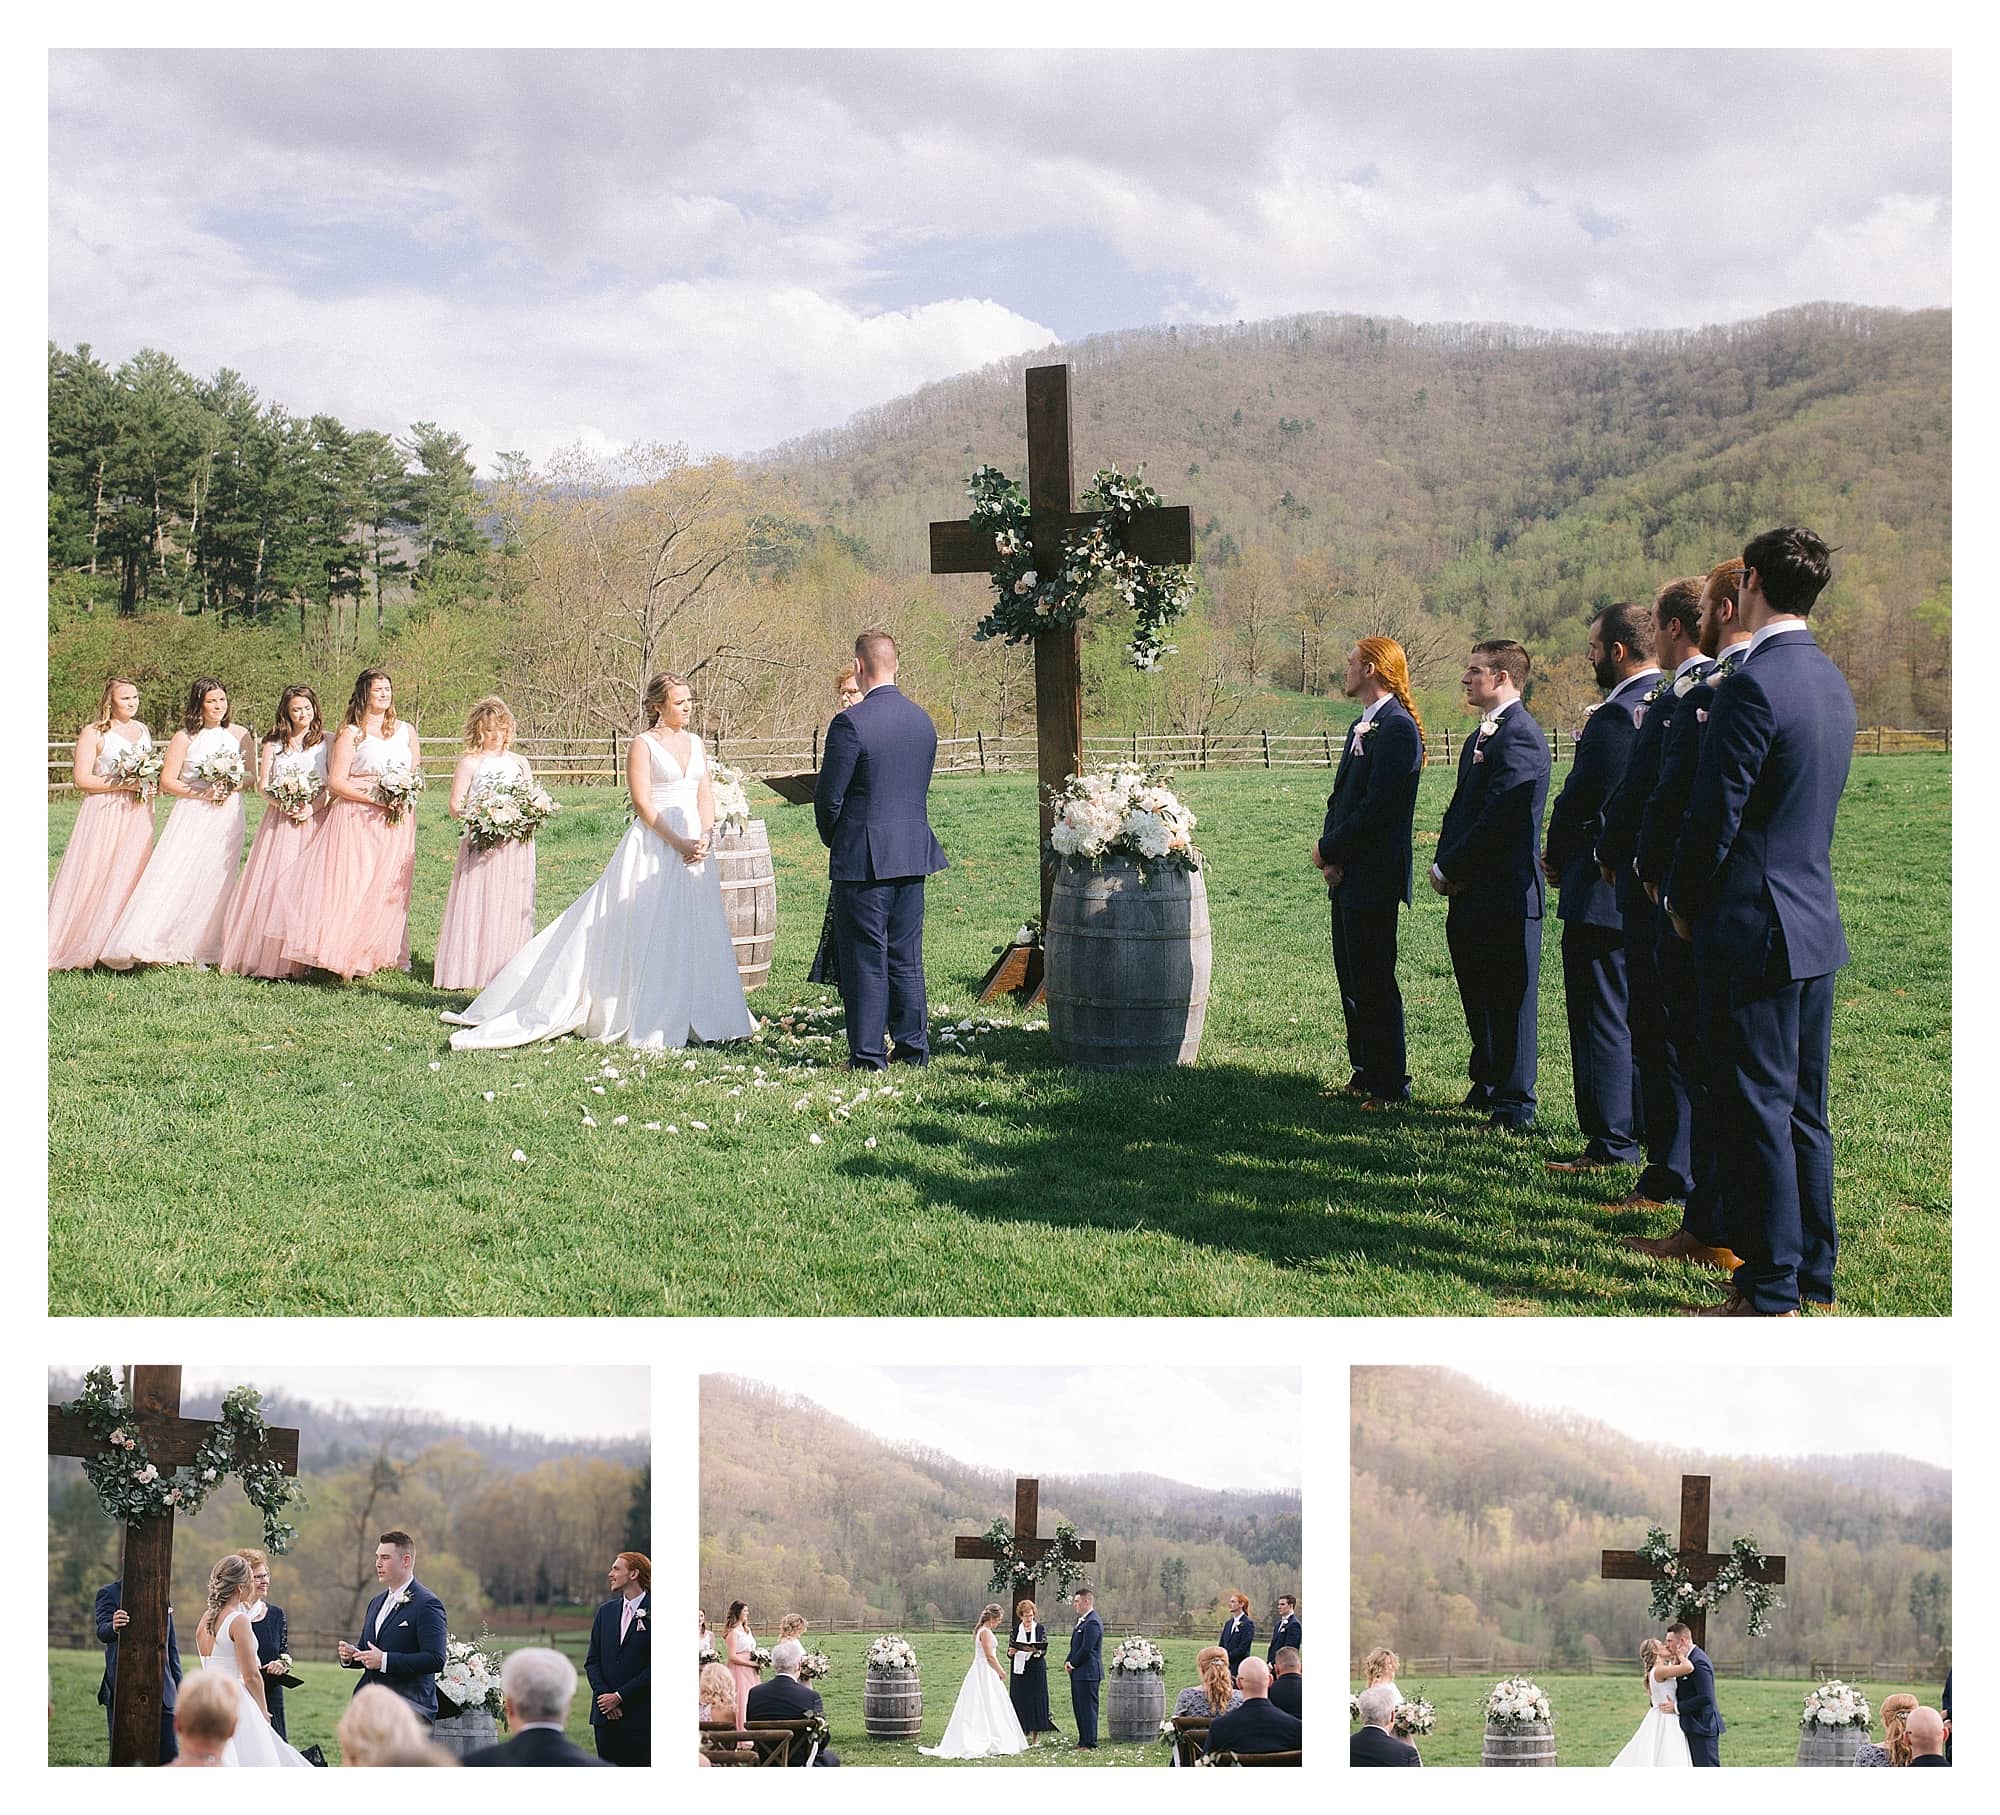 Wedding ceremony outdoors in grassy field among mountains - bride and groom first kiss